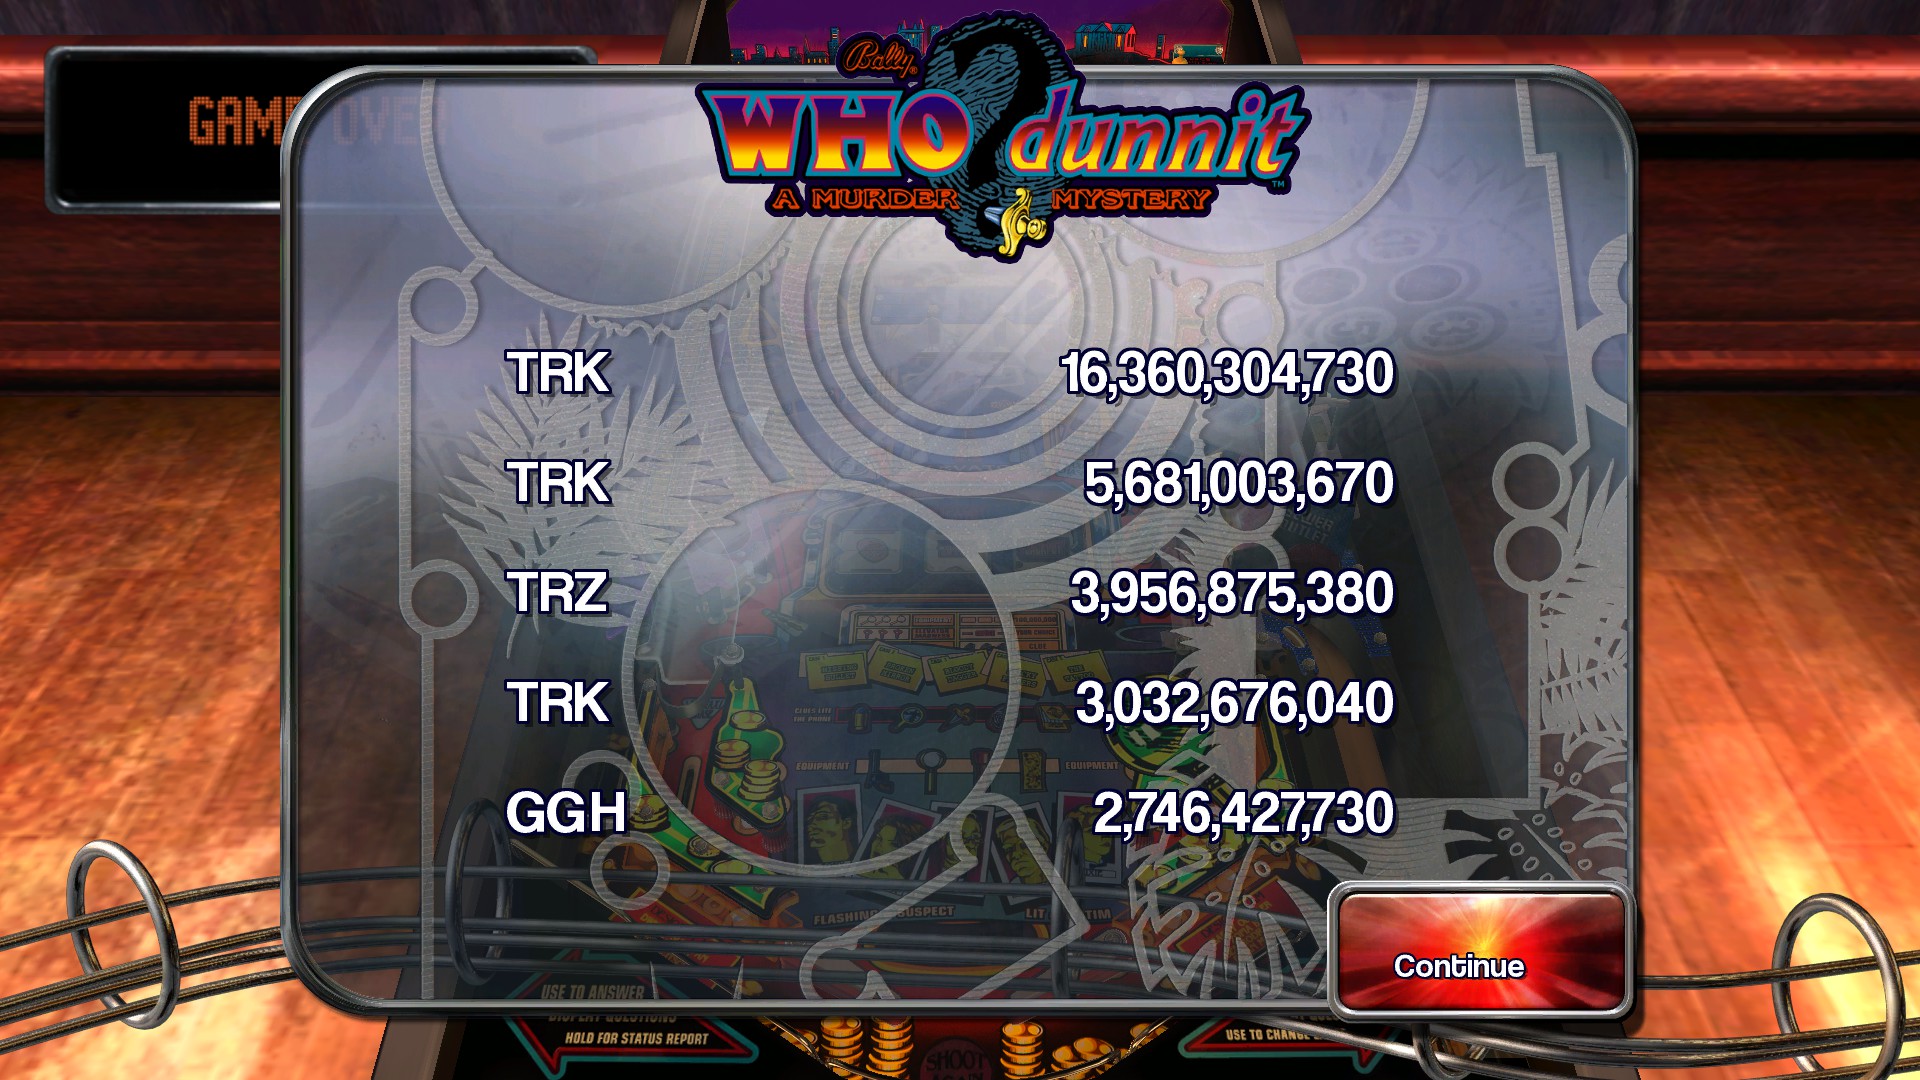 TheTrickster: Pinball Arcade: WHO Dunnit (PC) 16,360,304,730 points on 2015-11-23 01:11:06